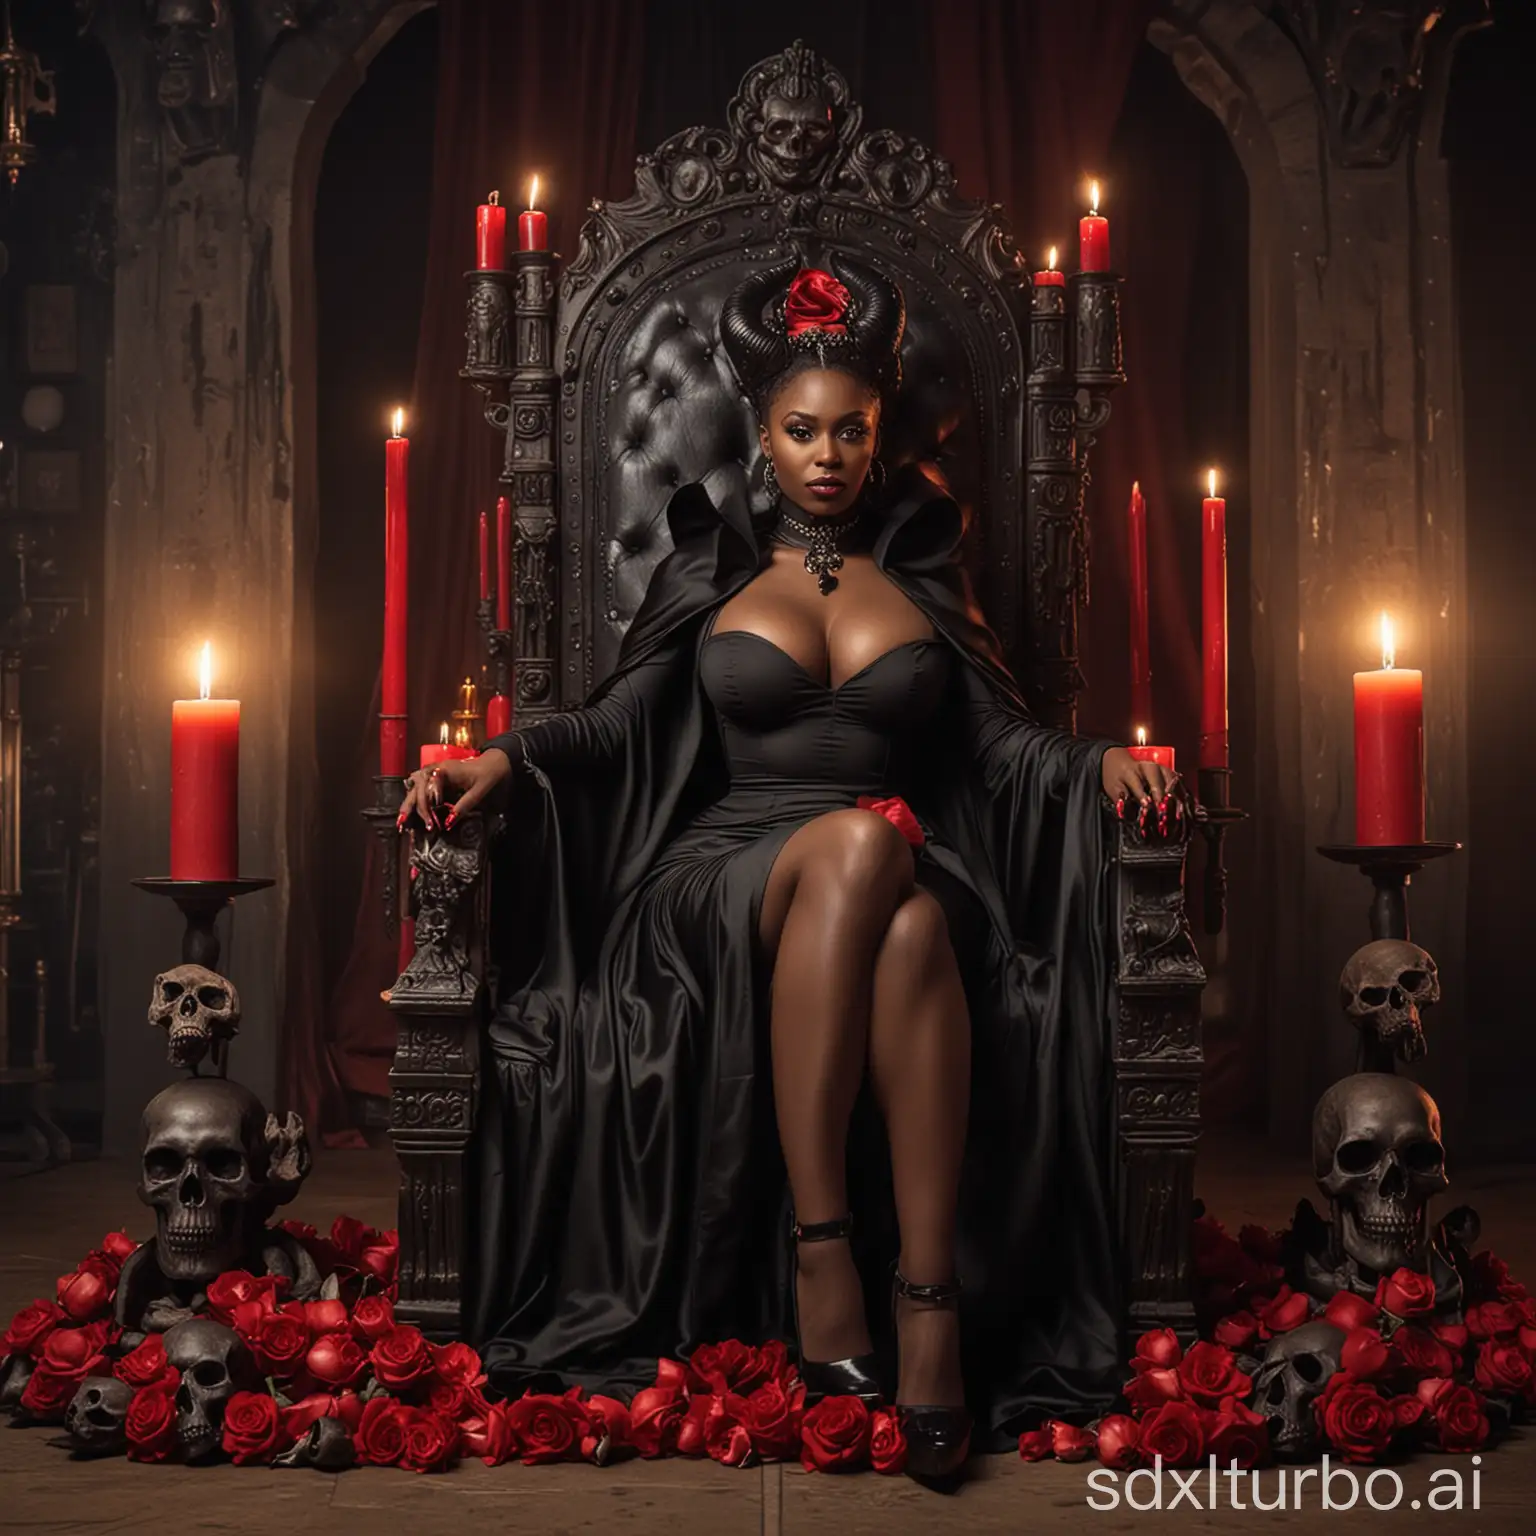 Dark-Queen-with-Horns-and-Skulls-Powerful-Black-Woman-in-Gothic-Attire-on-Throne